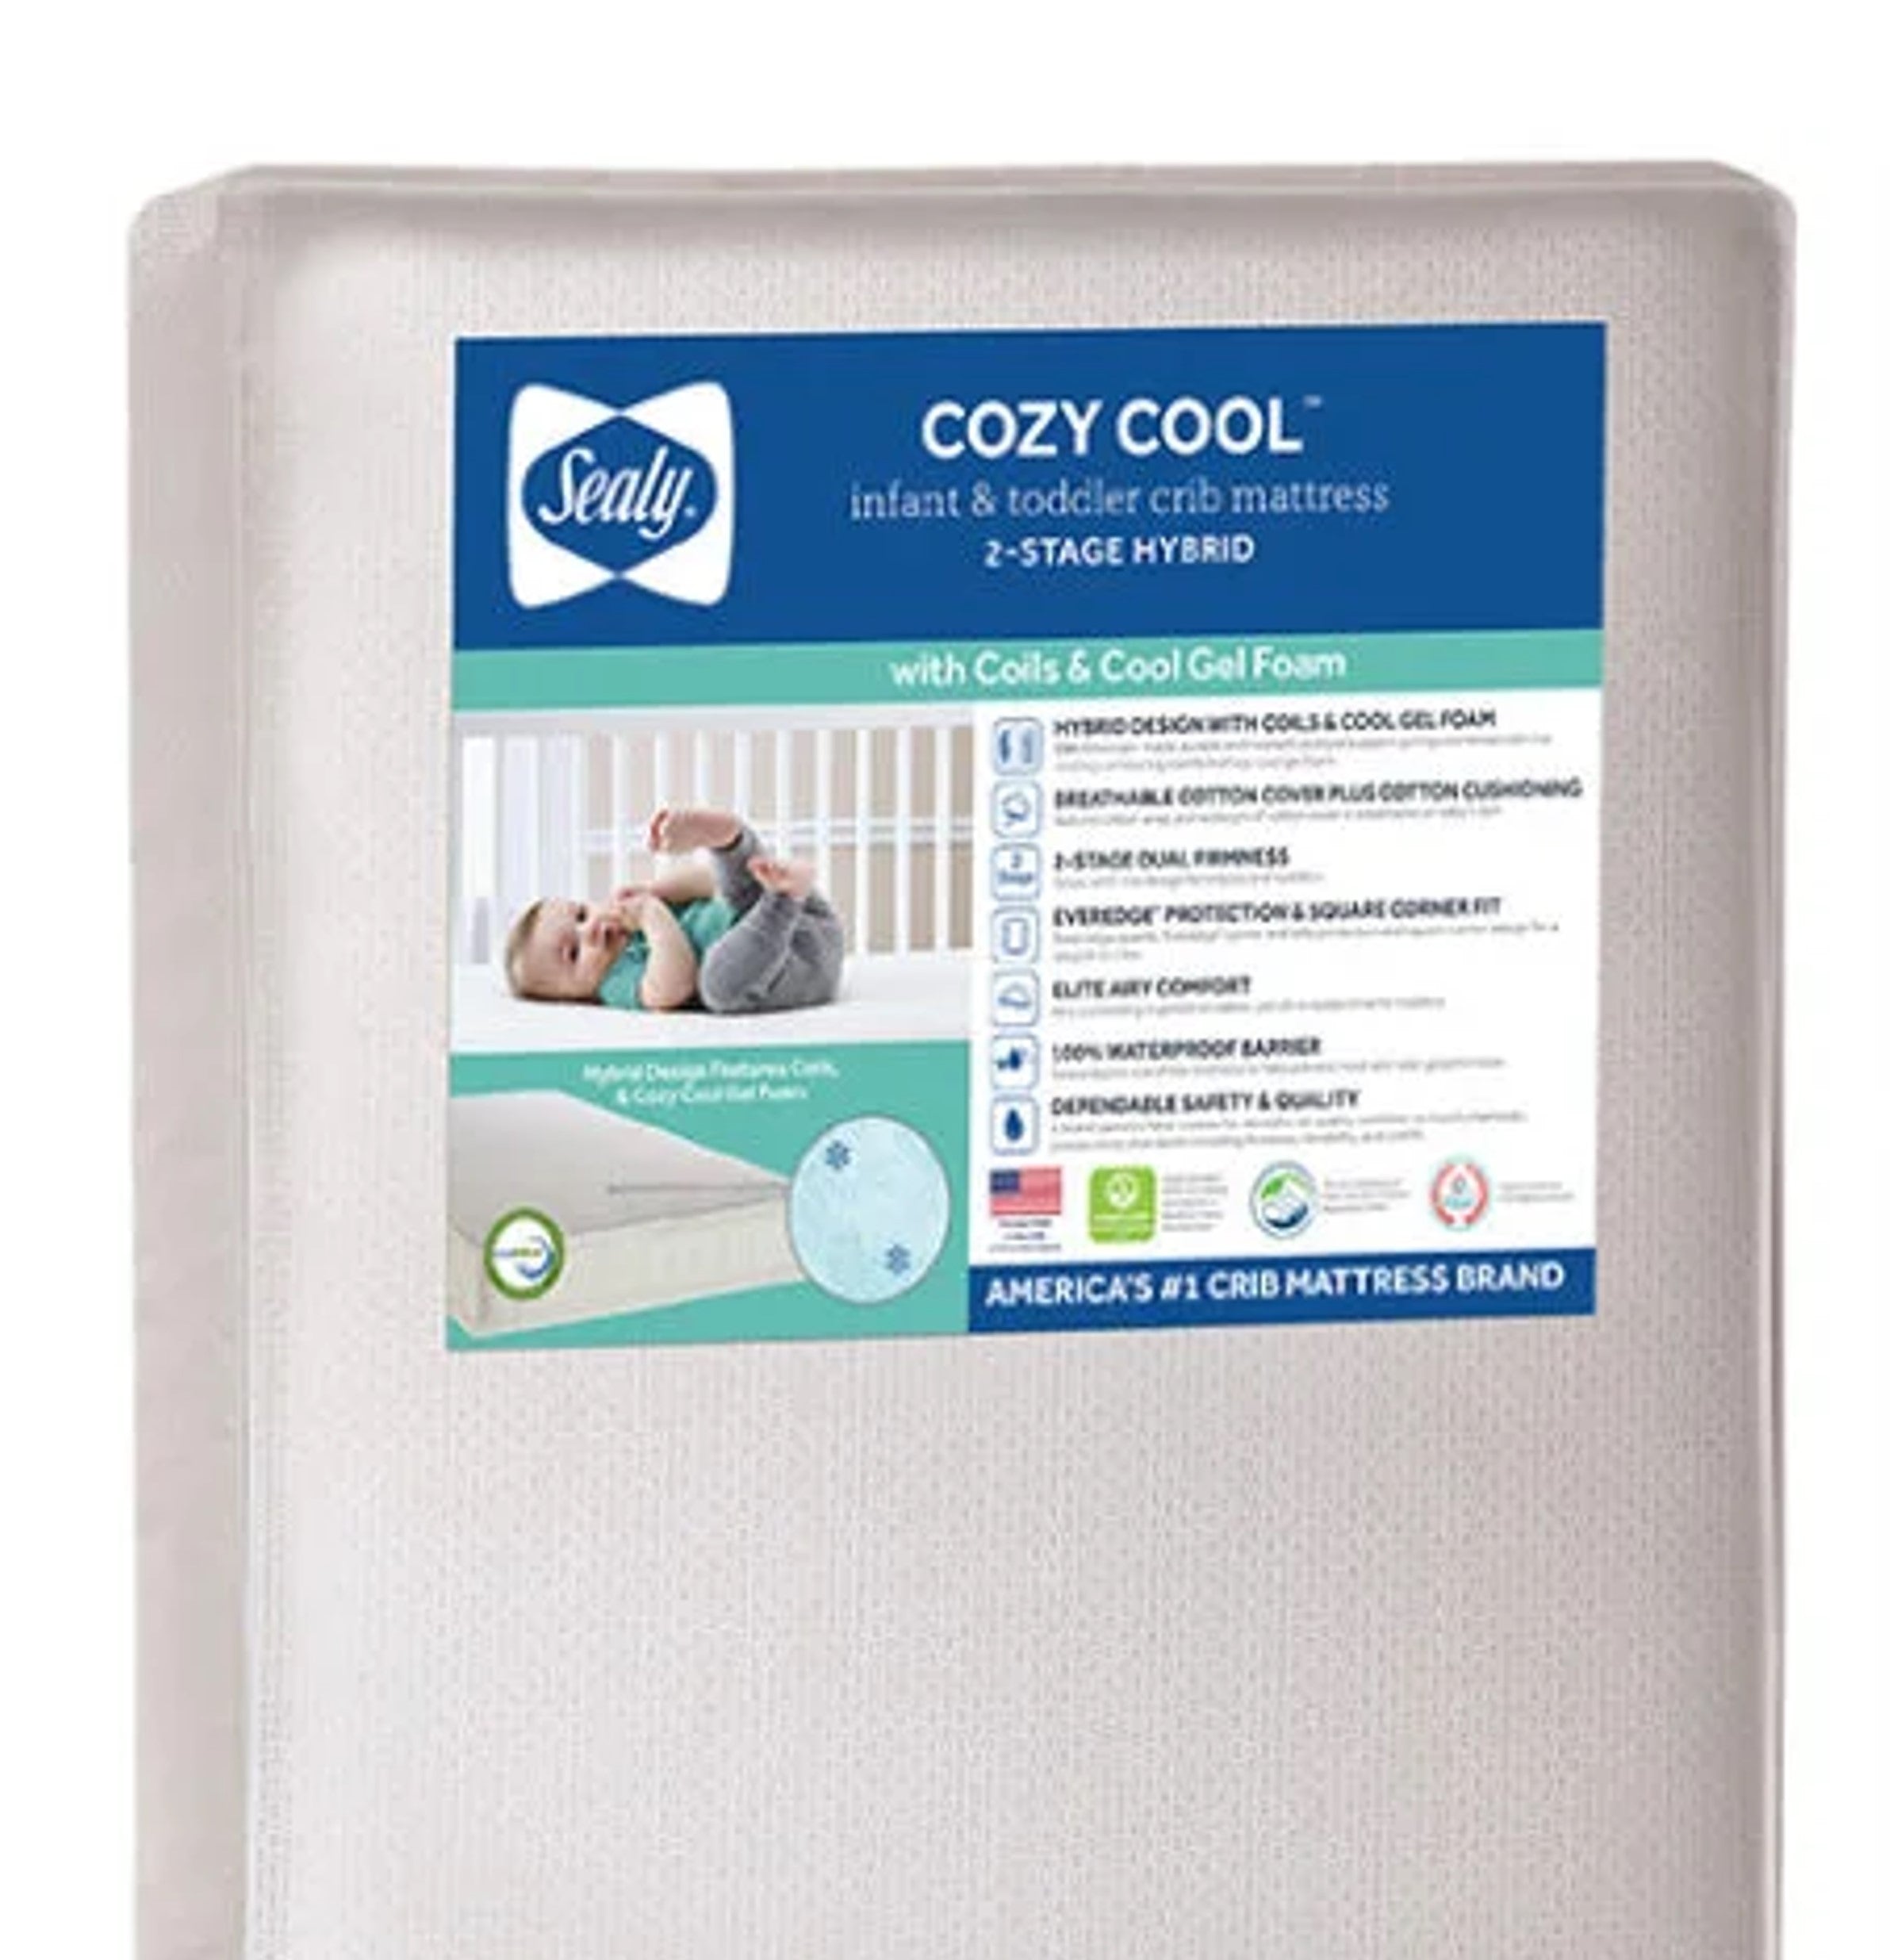 Sealy® Cozy Cool™ Hybrid 2-Stage Coil & Gel Baby & Toddler Crib Mattre